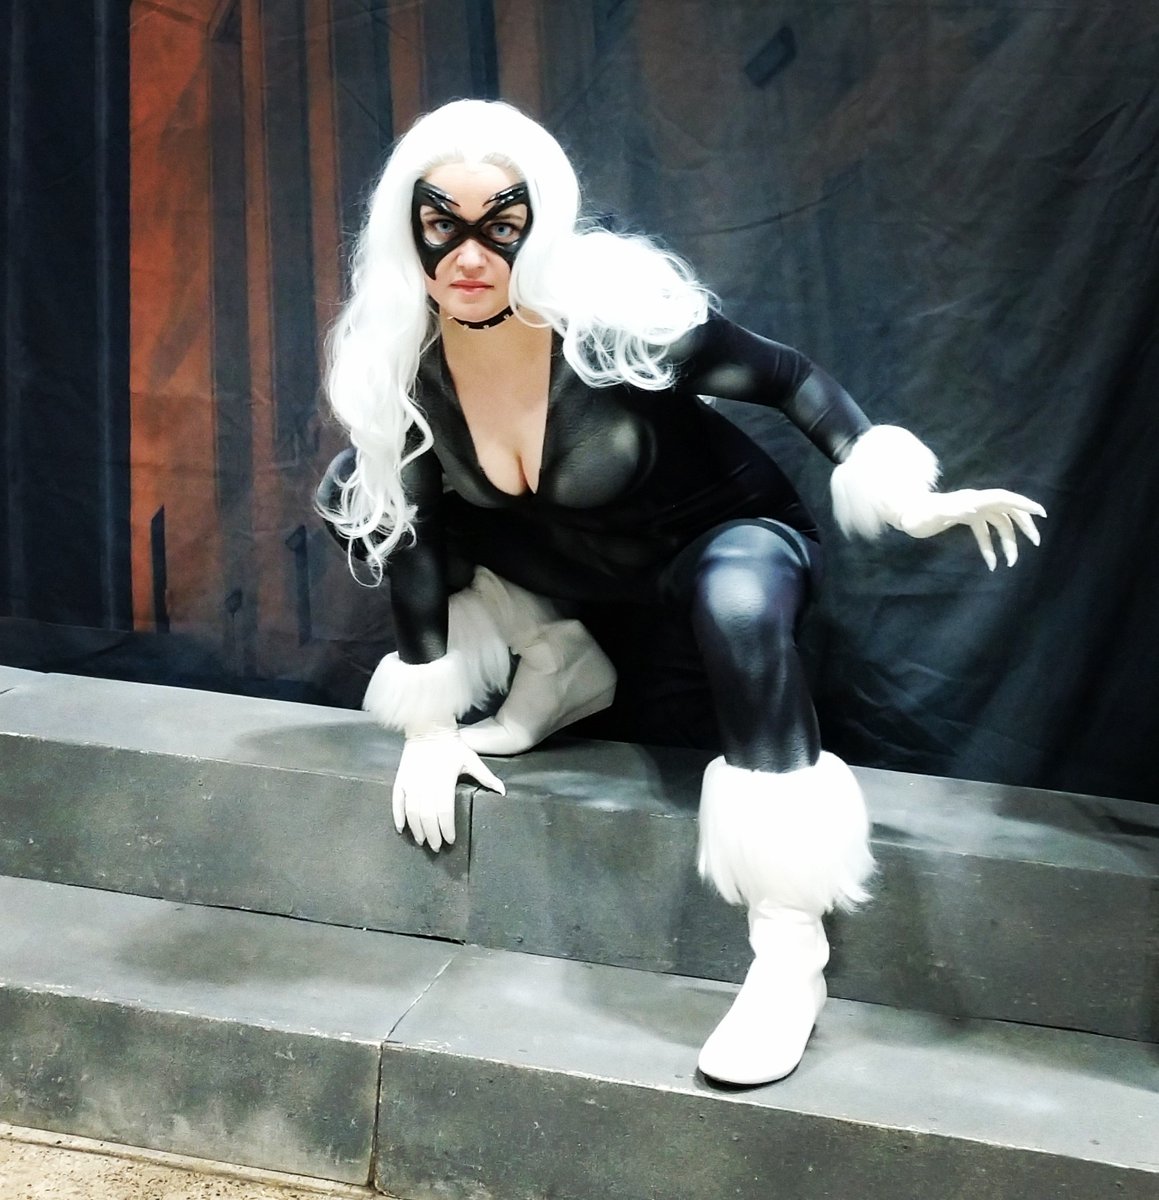 I still love how Black Cat turned out! 😸

#blackcatcosplay #blackcatcosplayer #blackcatspiderman #blackcatspidermancosplay #spidermanblackcat #spiderman #spidermancosplay #cosplay #cosplayer #vonkatzcosplay